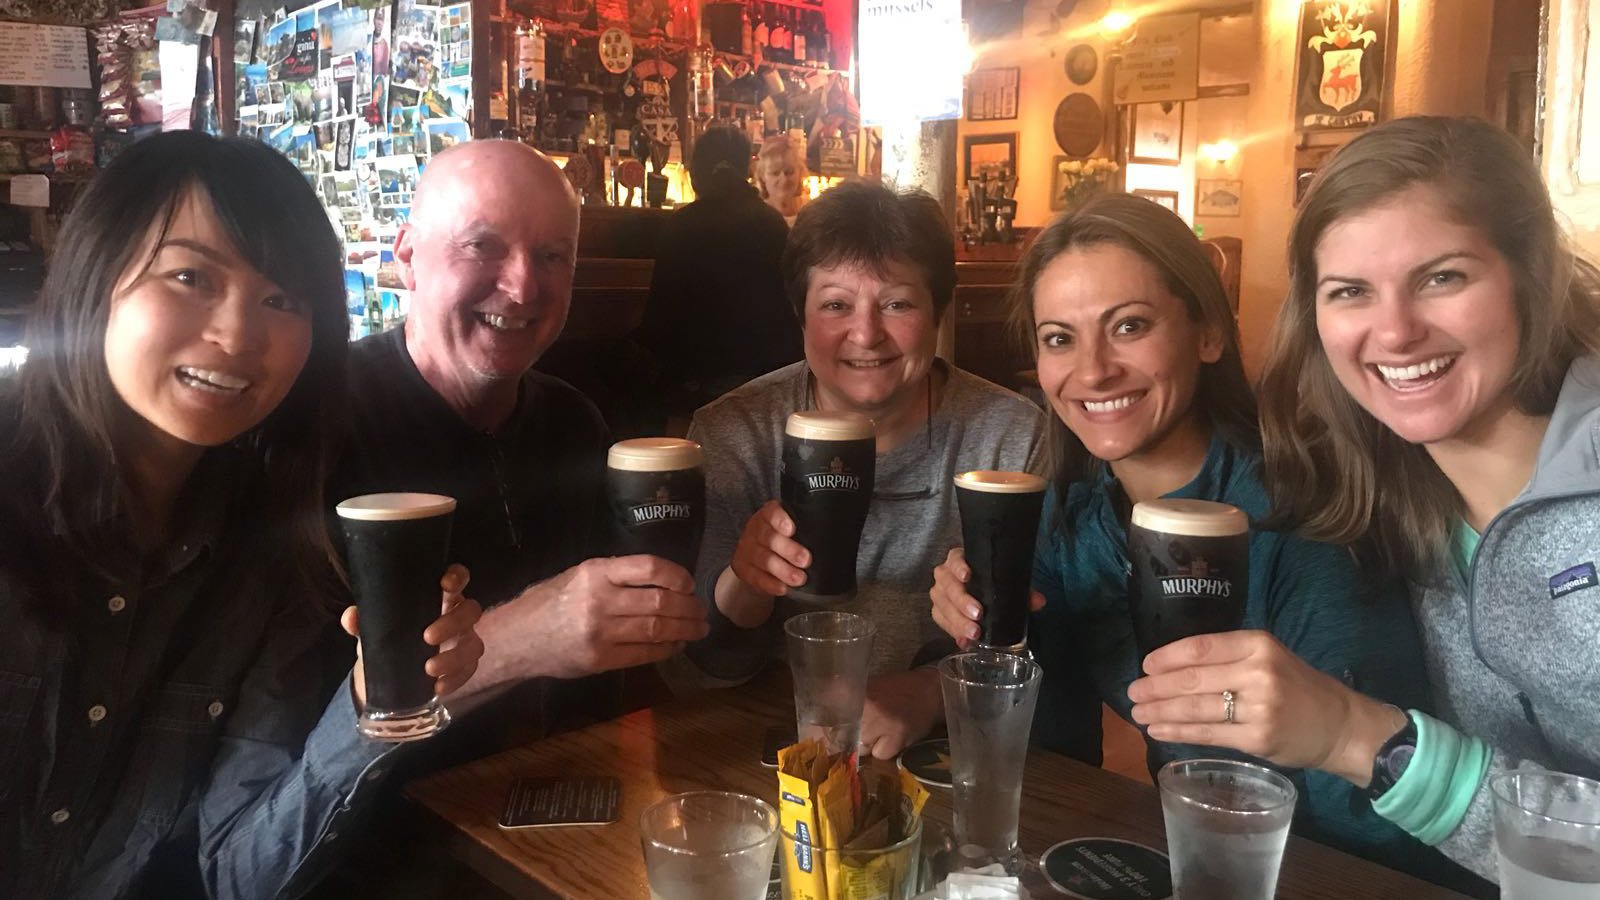 Group toasting the camera with glasses of beer in an Irish pub